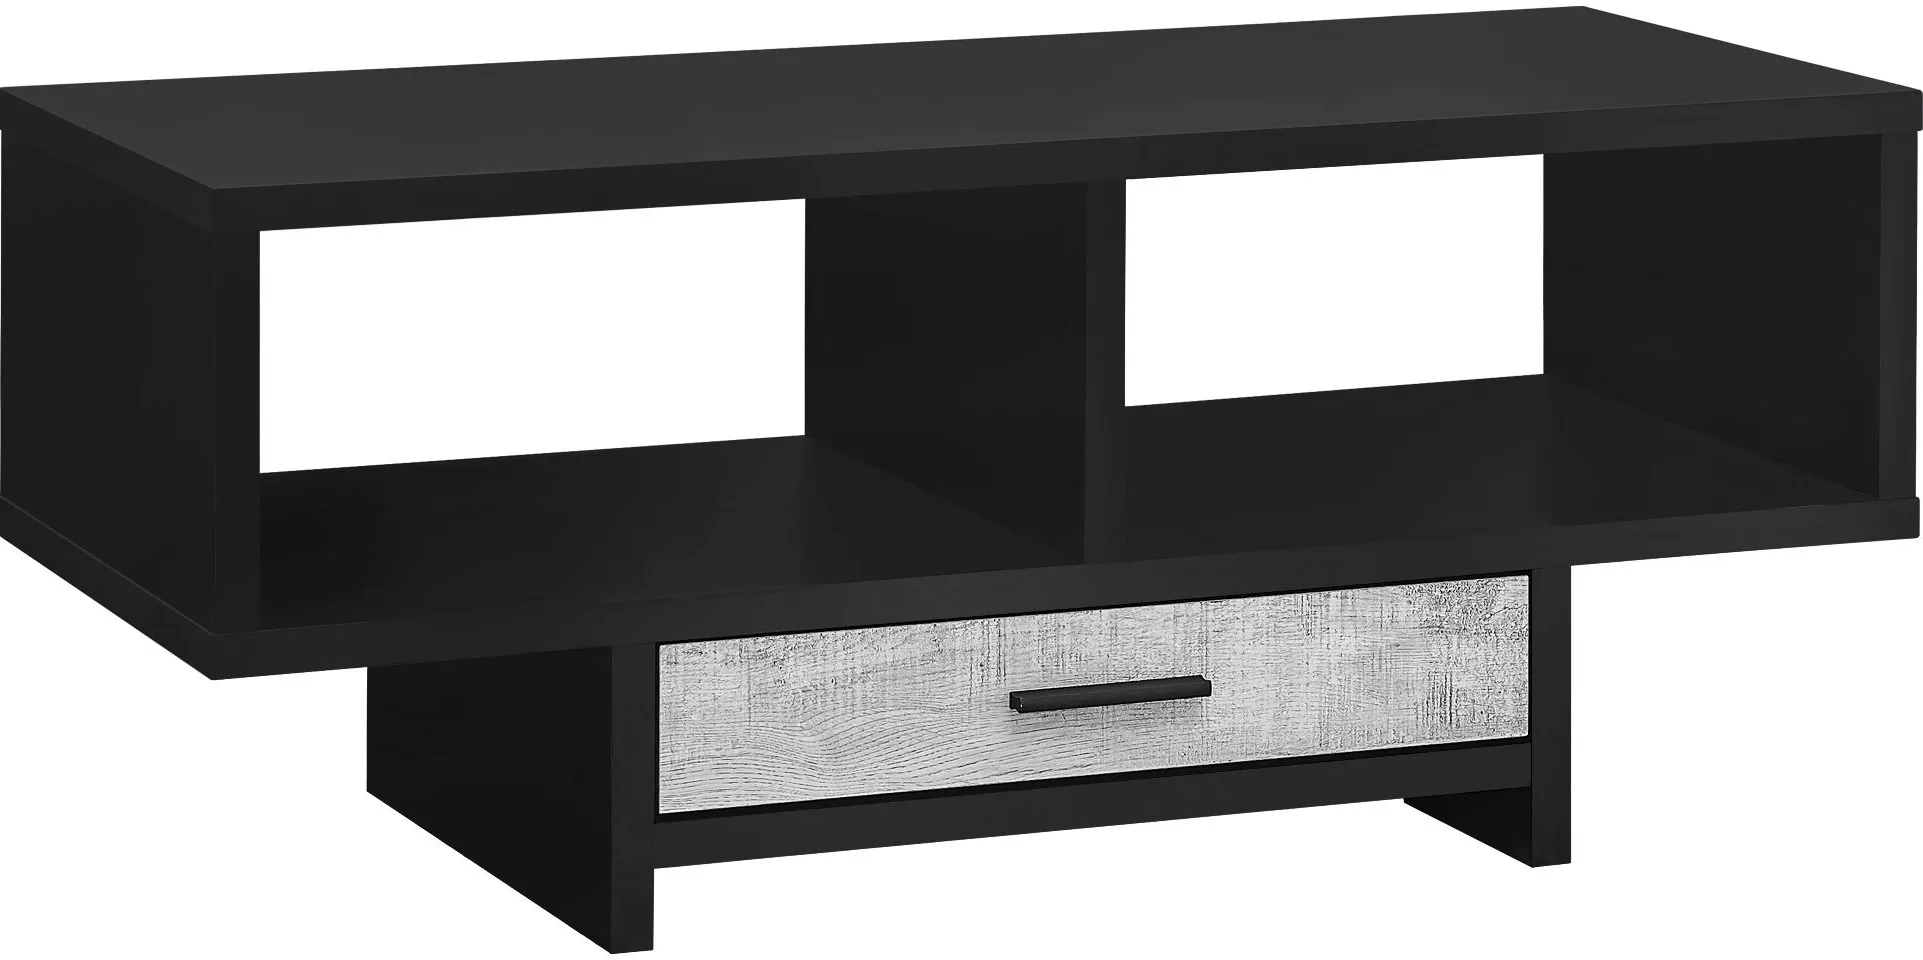 Coffee Table, Accent, Cocktail, Rectangular, Storage, Living Room, 42" L, Drawer, Laminate, Black, Grey, Contemporary, Modern